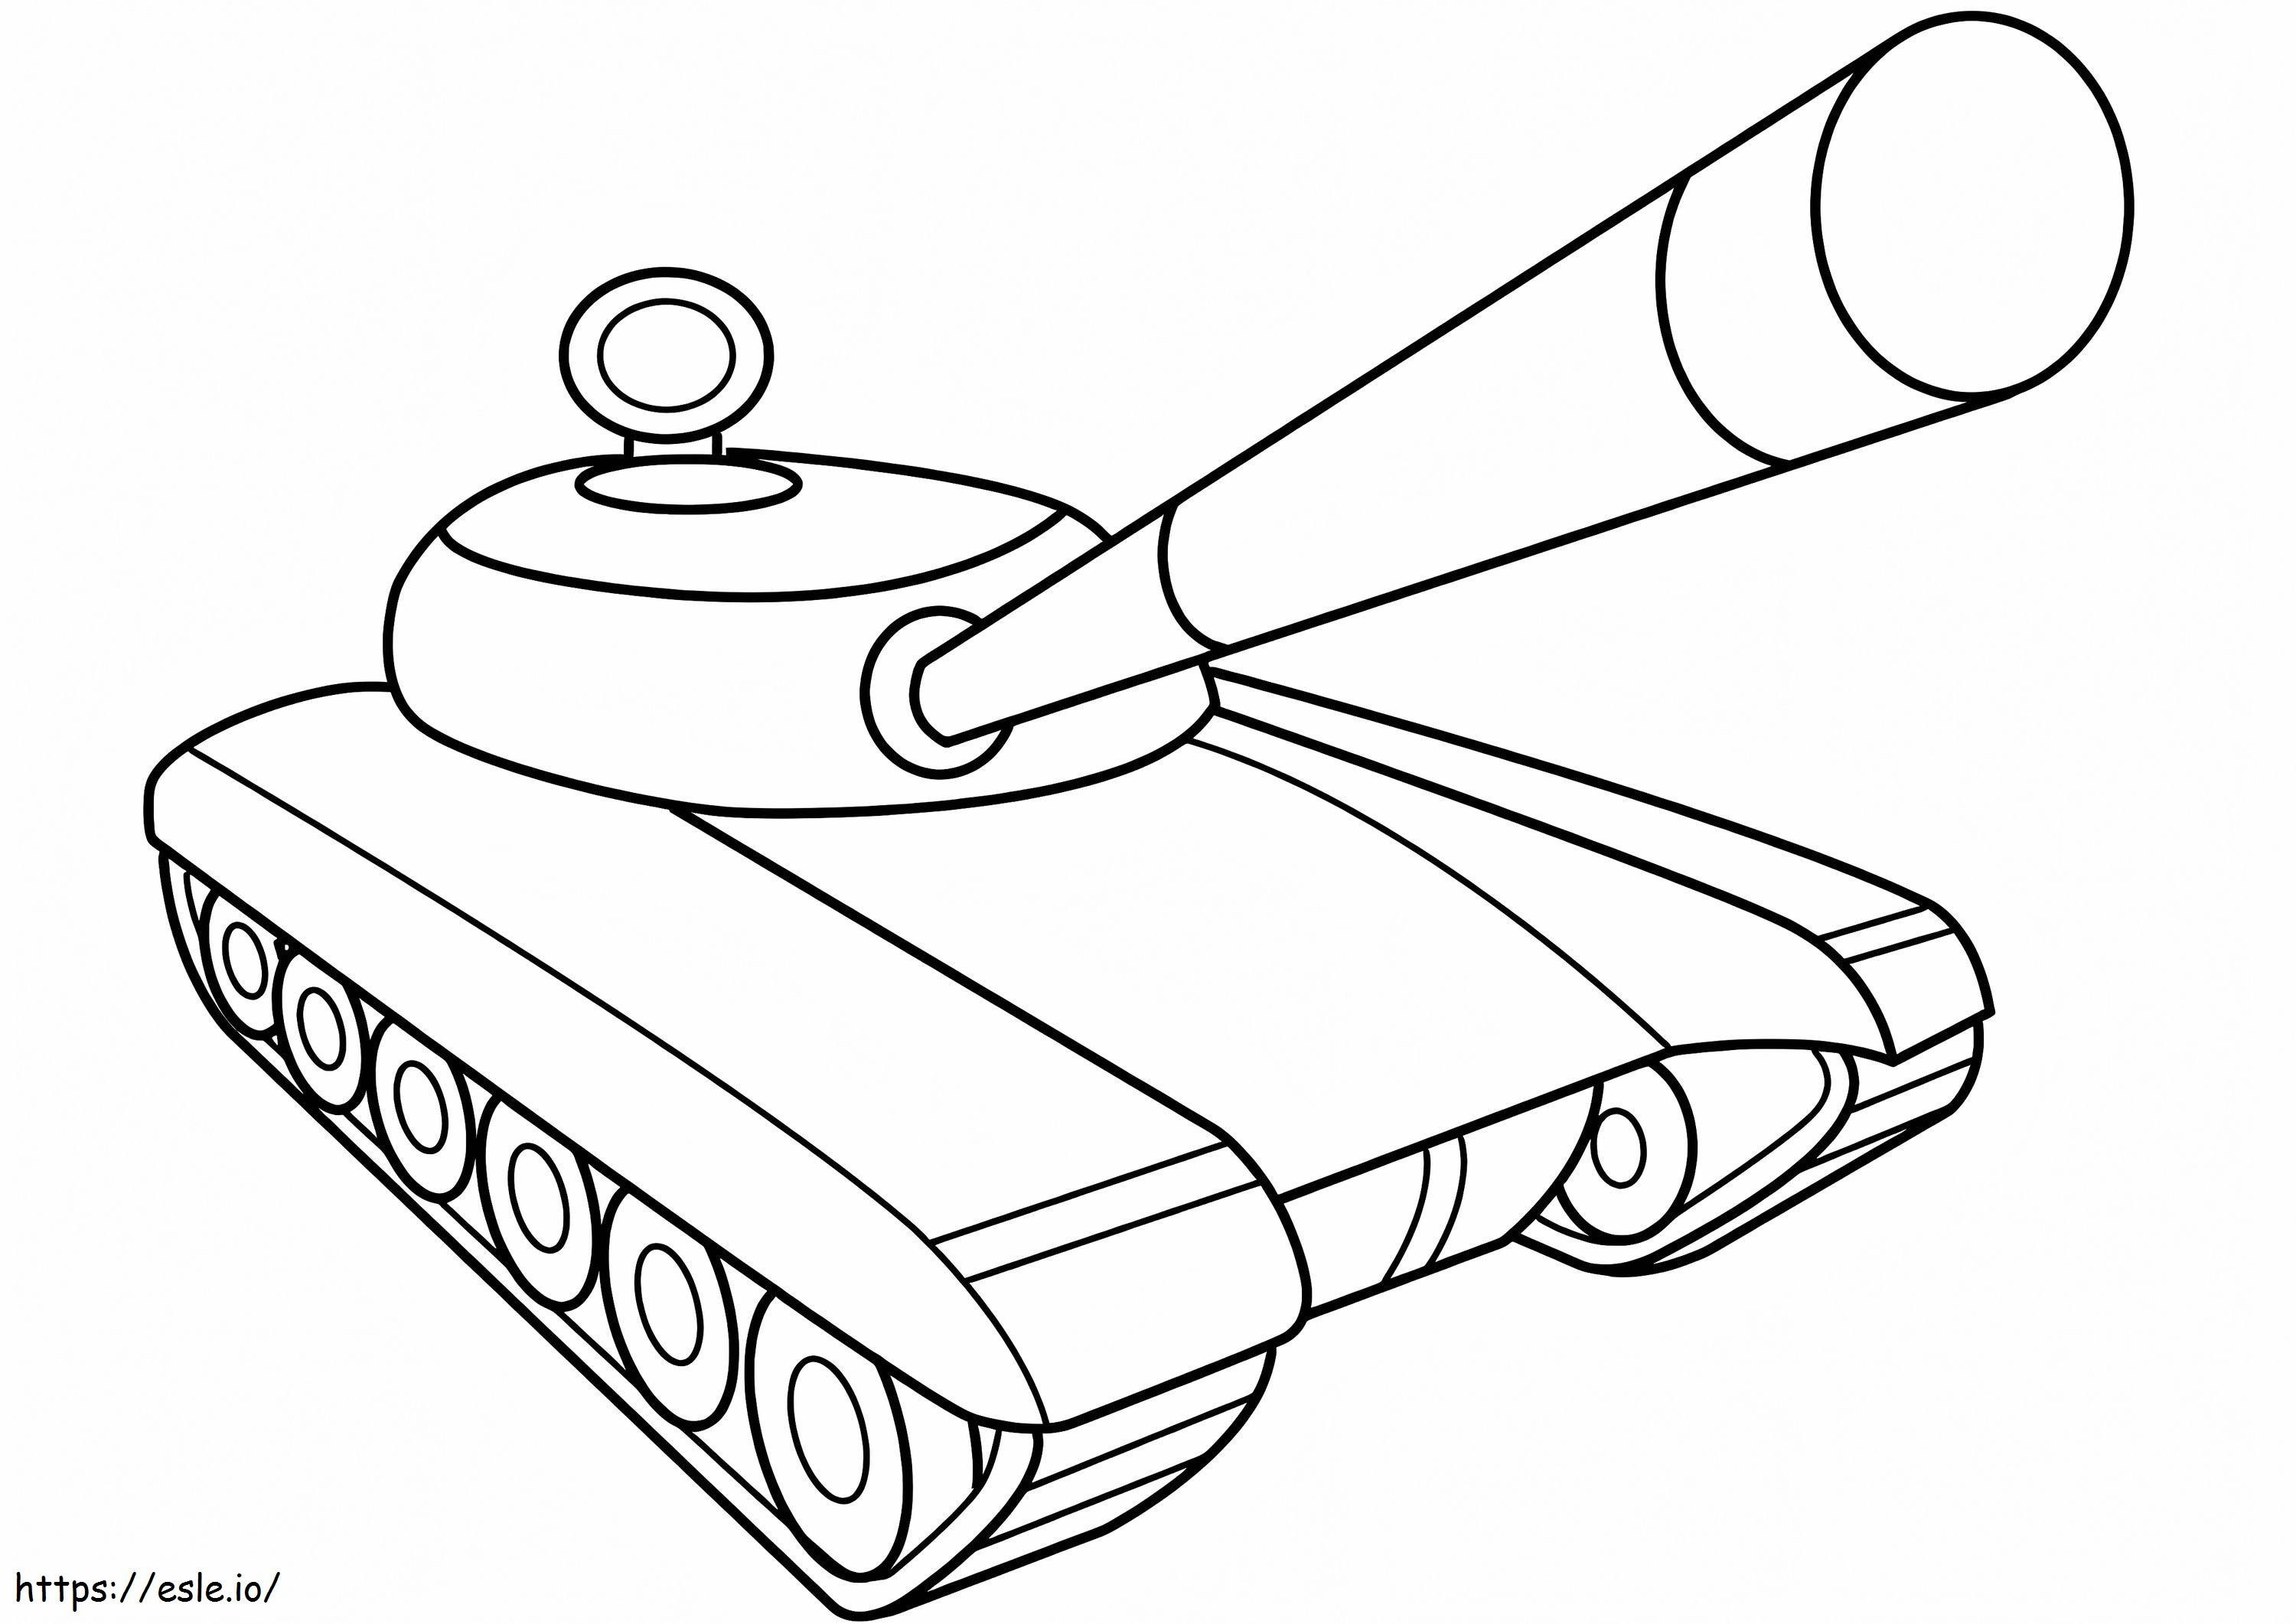 Army Tank coloring page